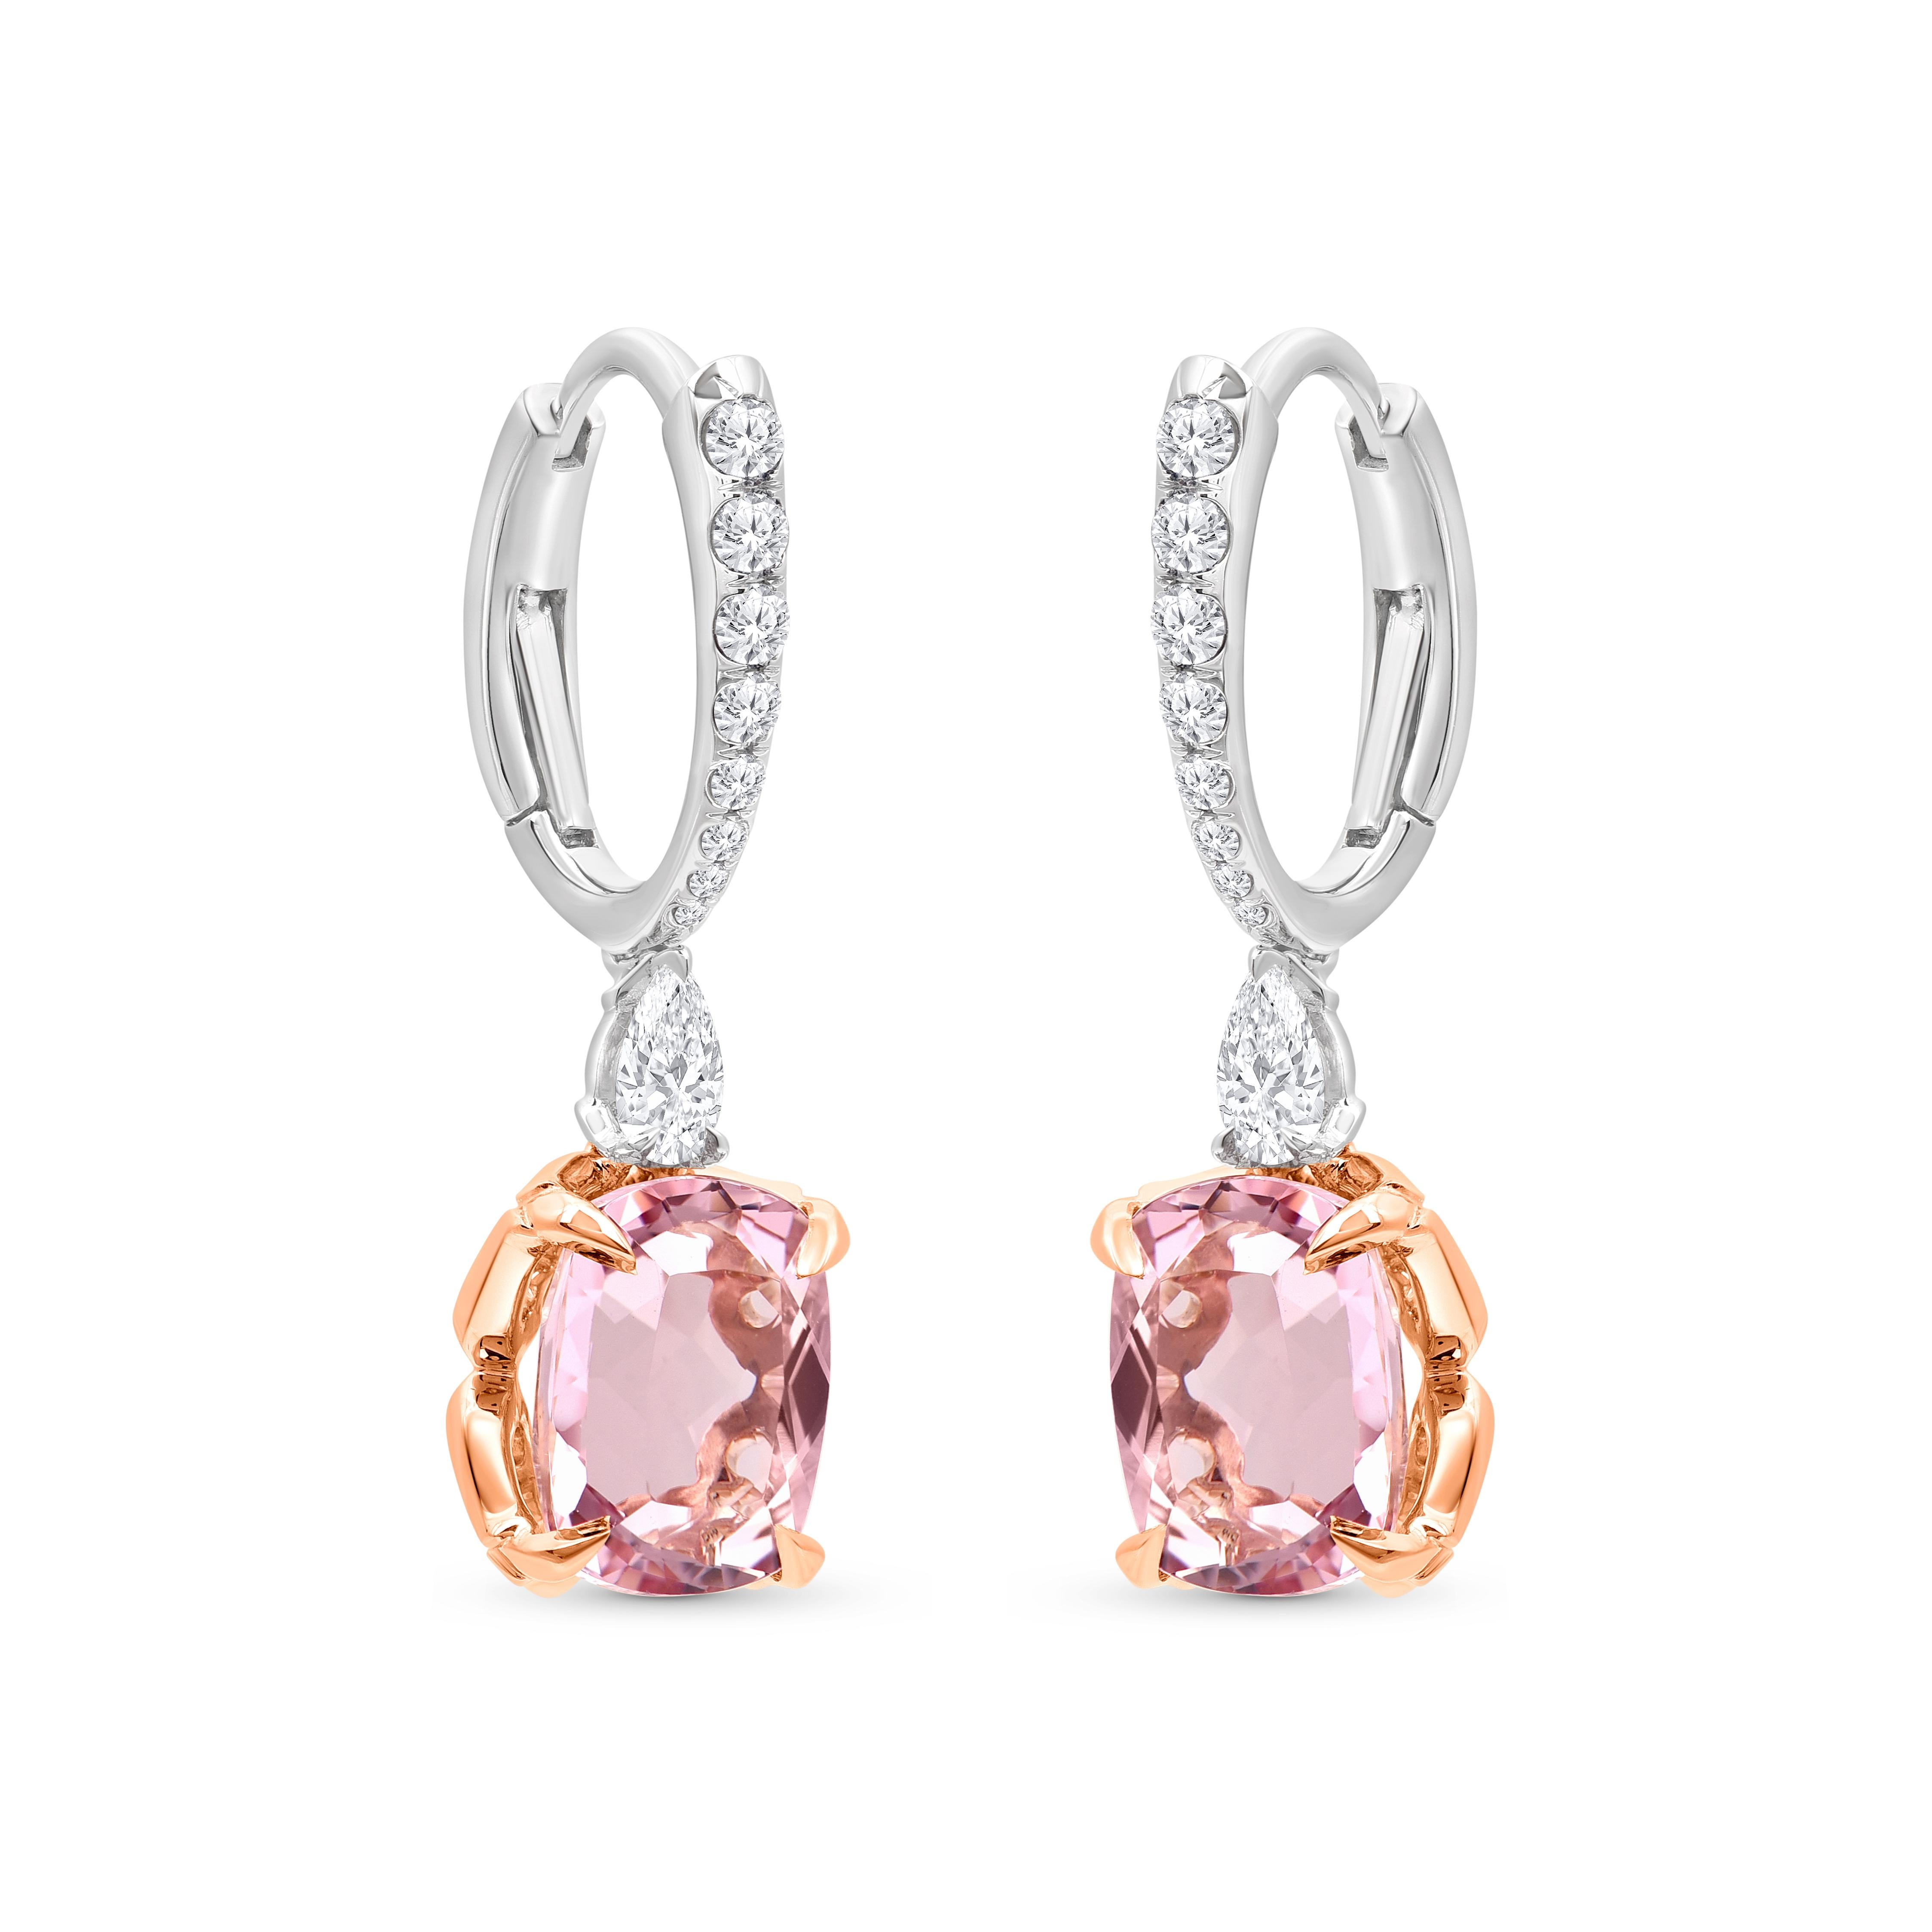 Inspired by the JOY of experiencing a gushing waterfall, these exquisite and elegant dangling earrings from the Cascade Collection are studded with brilliant cut diamonds and morganite dripping delicately.

Beautifully designed, these earrings will